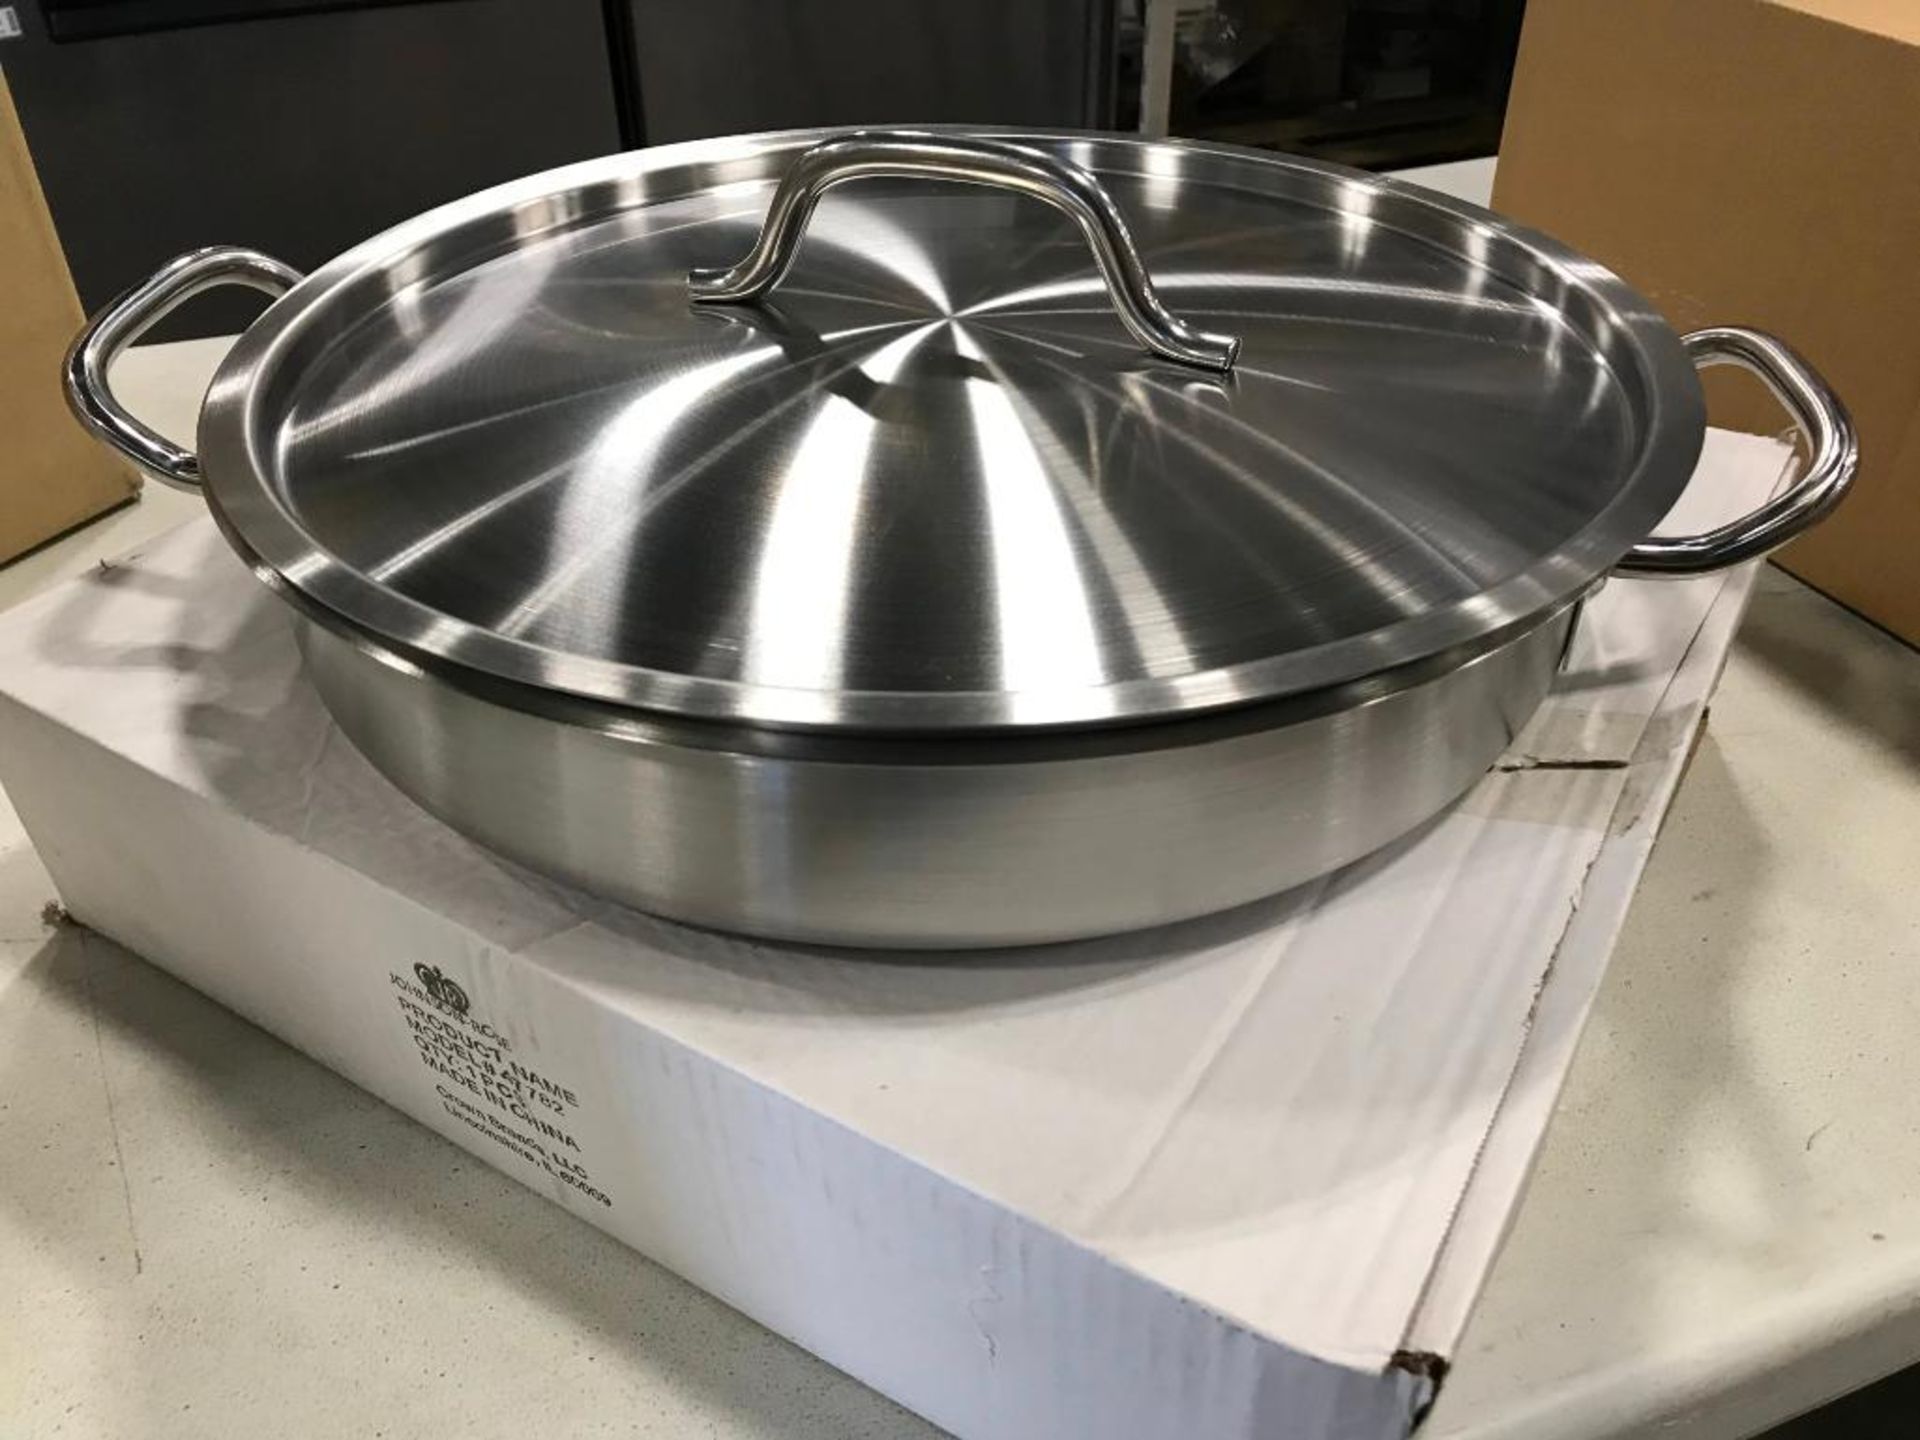 8QT HEAVY DUTY STAINLESS STEEL BRAZIER - JOHNSON ROSE 47782 - NEW - Image 3 of 3